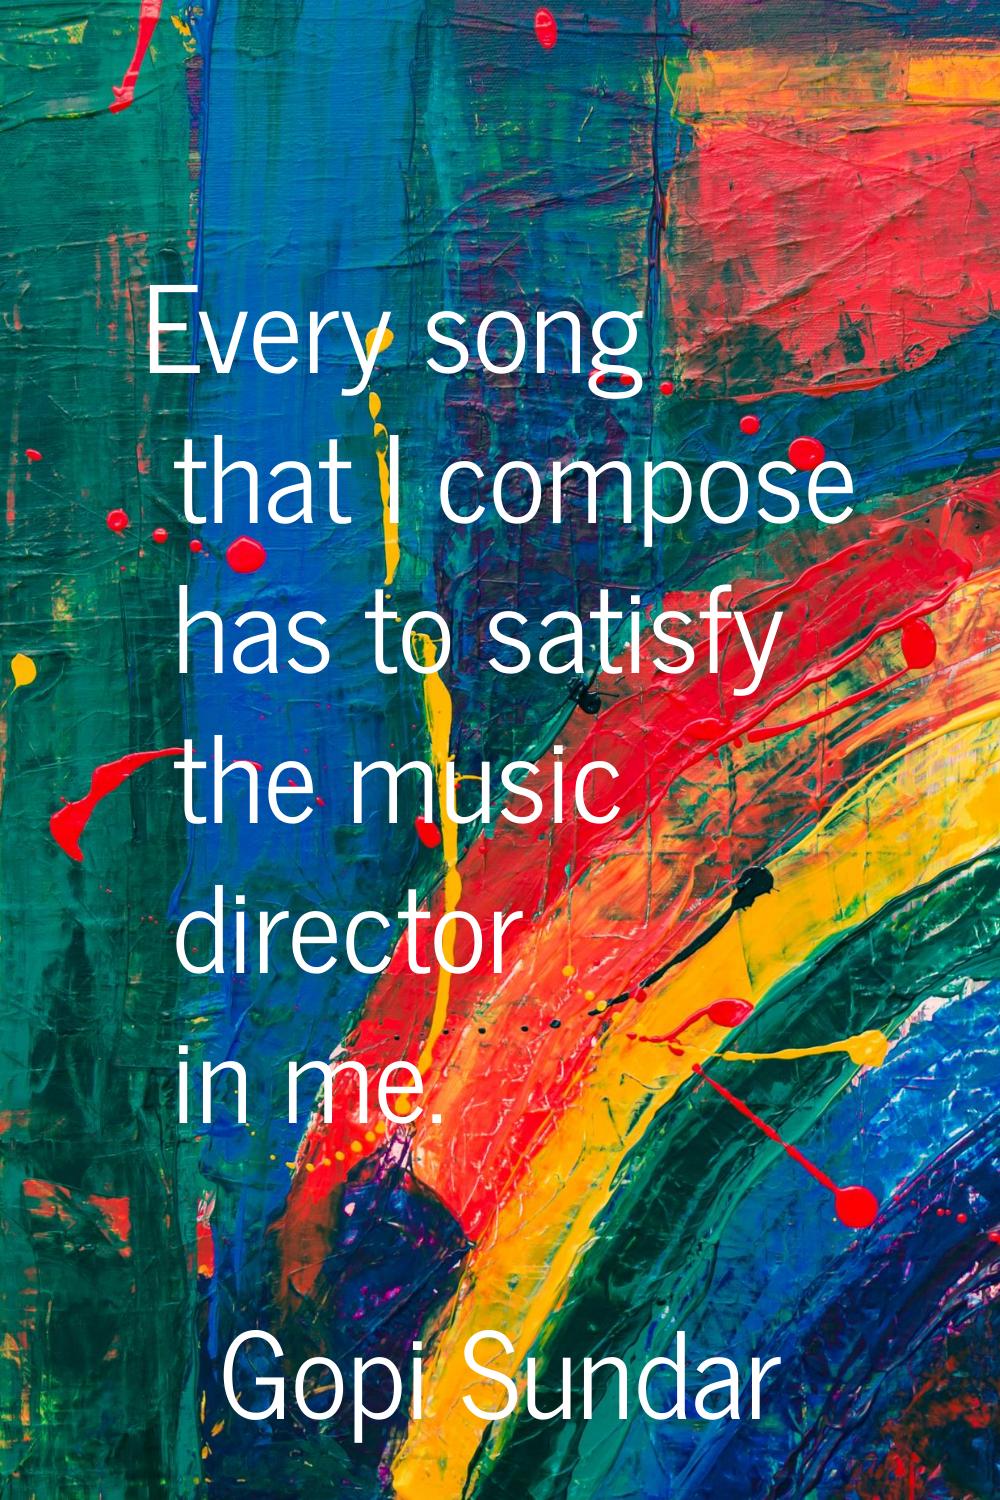 Every song that I compose has to satisfy the music director in me.